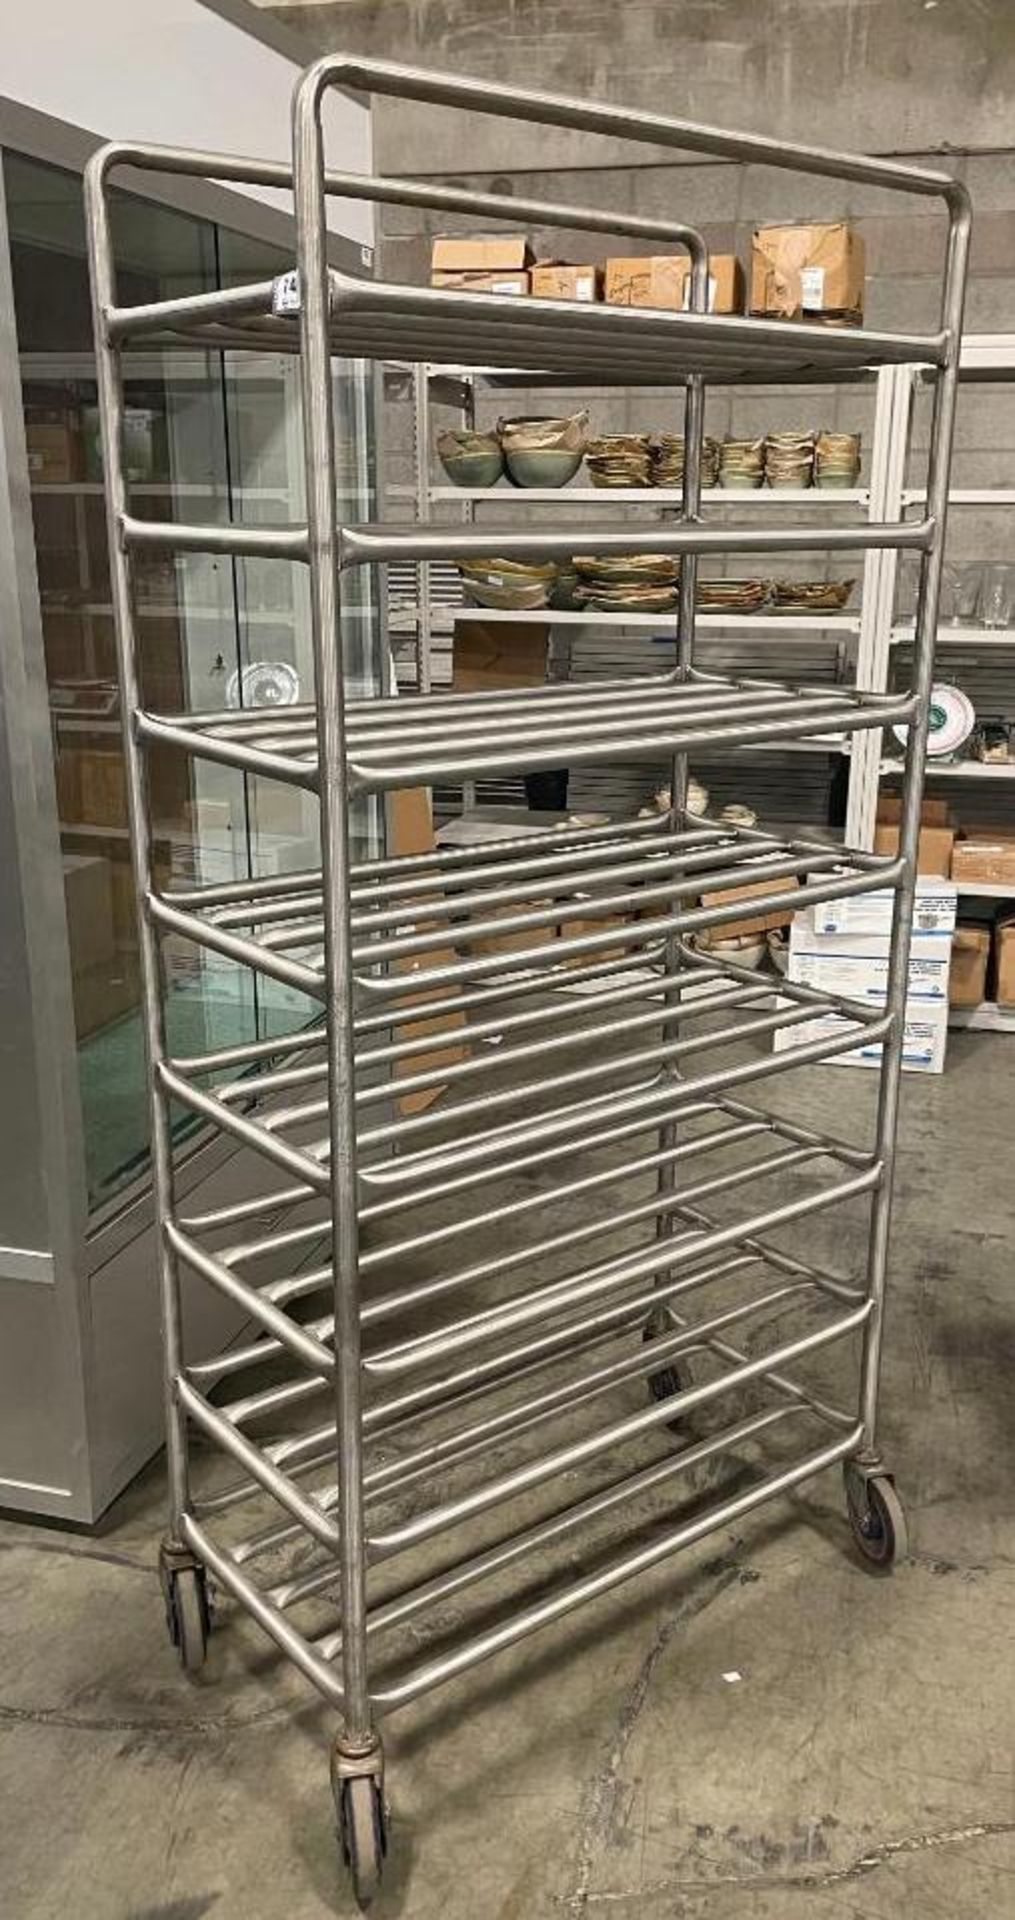 8 TIER STAINLESS STEEL MOBILE PLATTER CART WITH (24) PLASTIC PLATTERS - Image 3 of 10